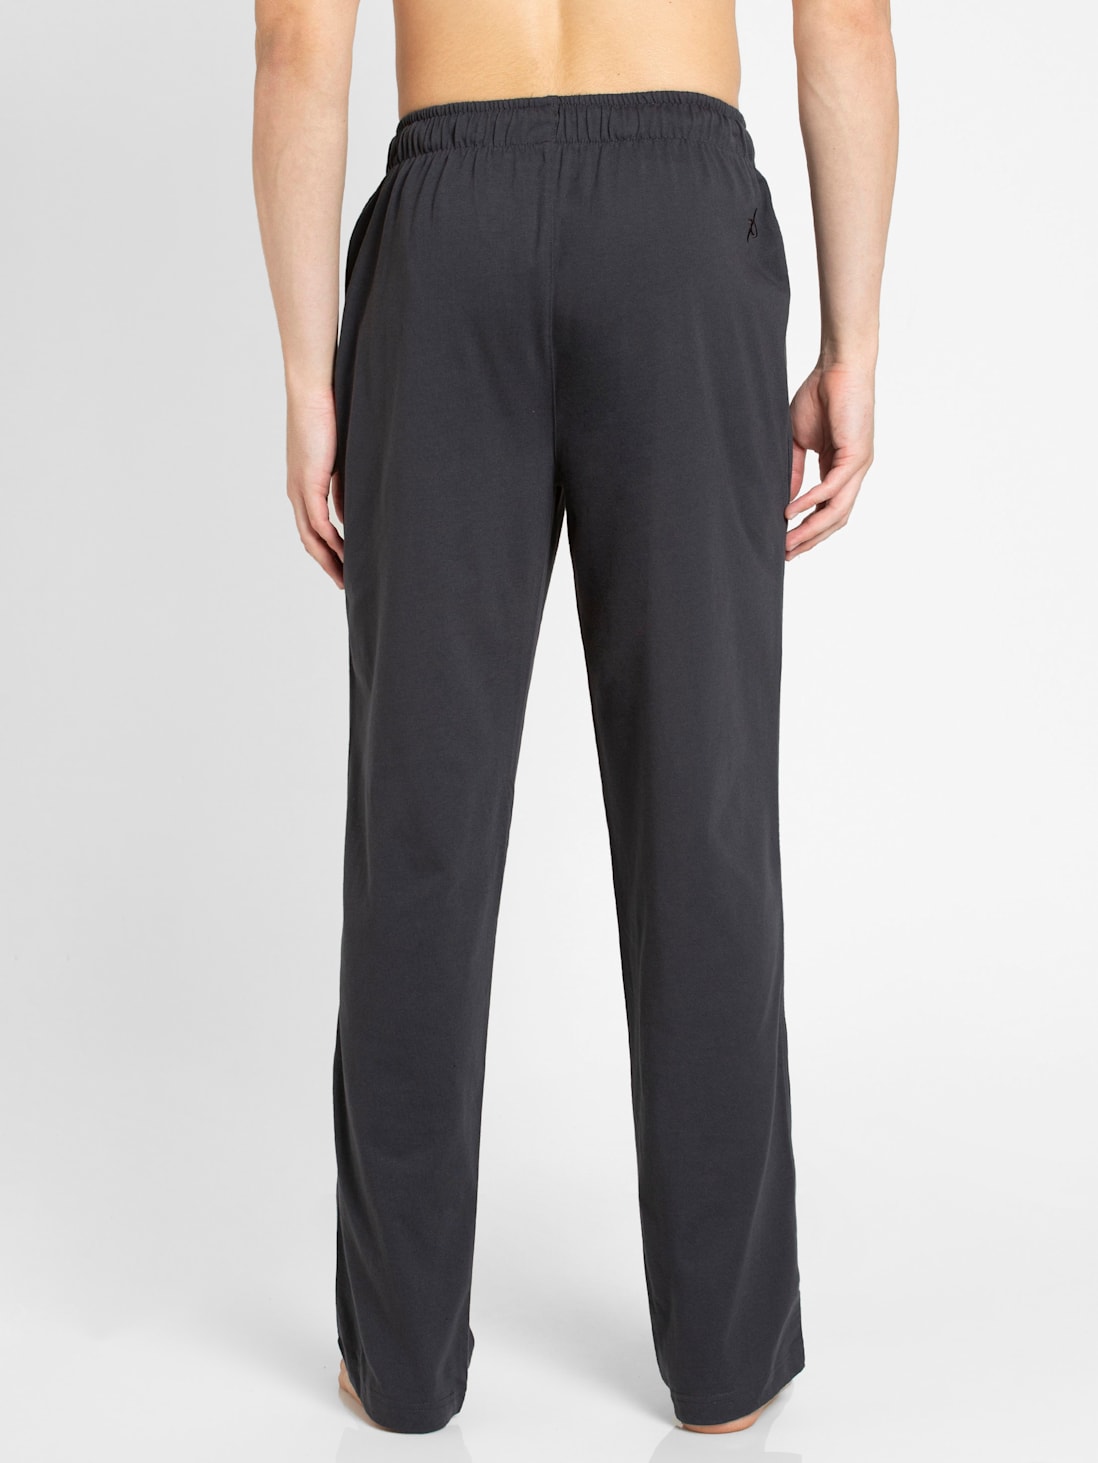 graphite and black track pant 9500 14